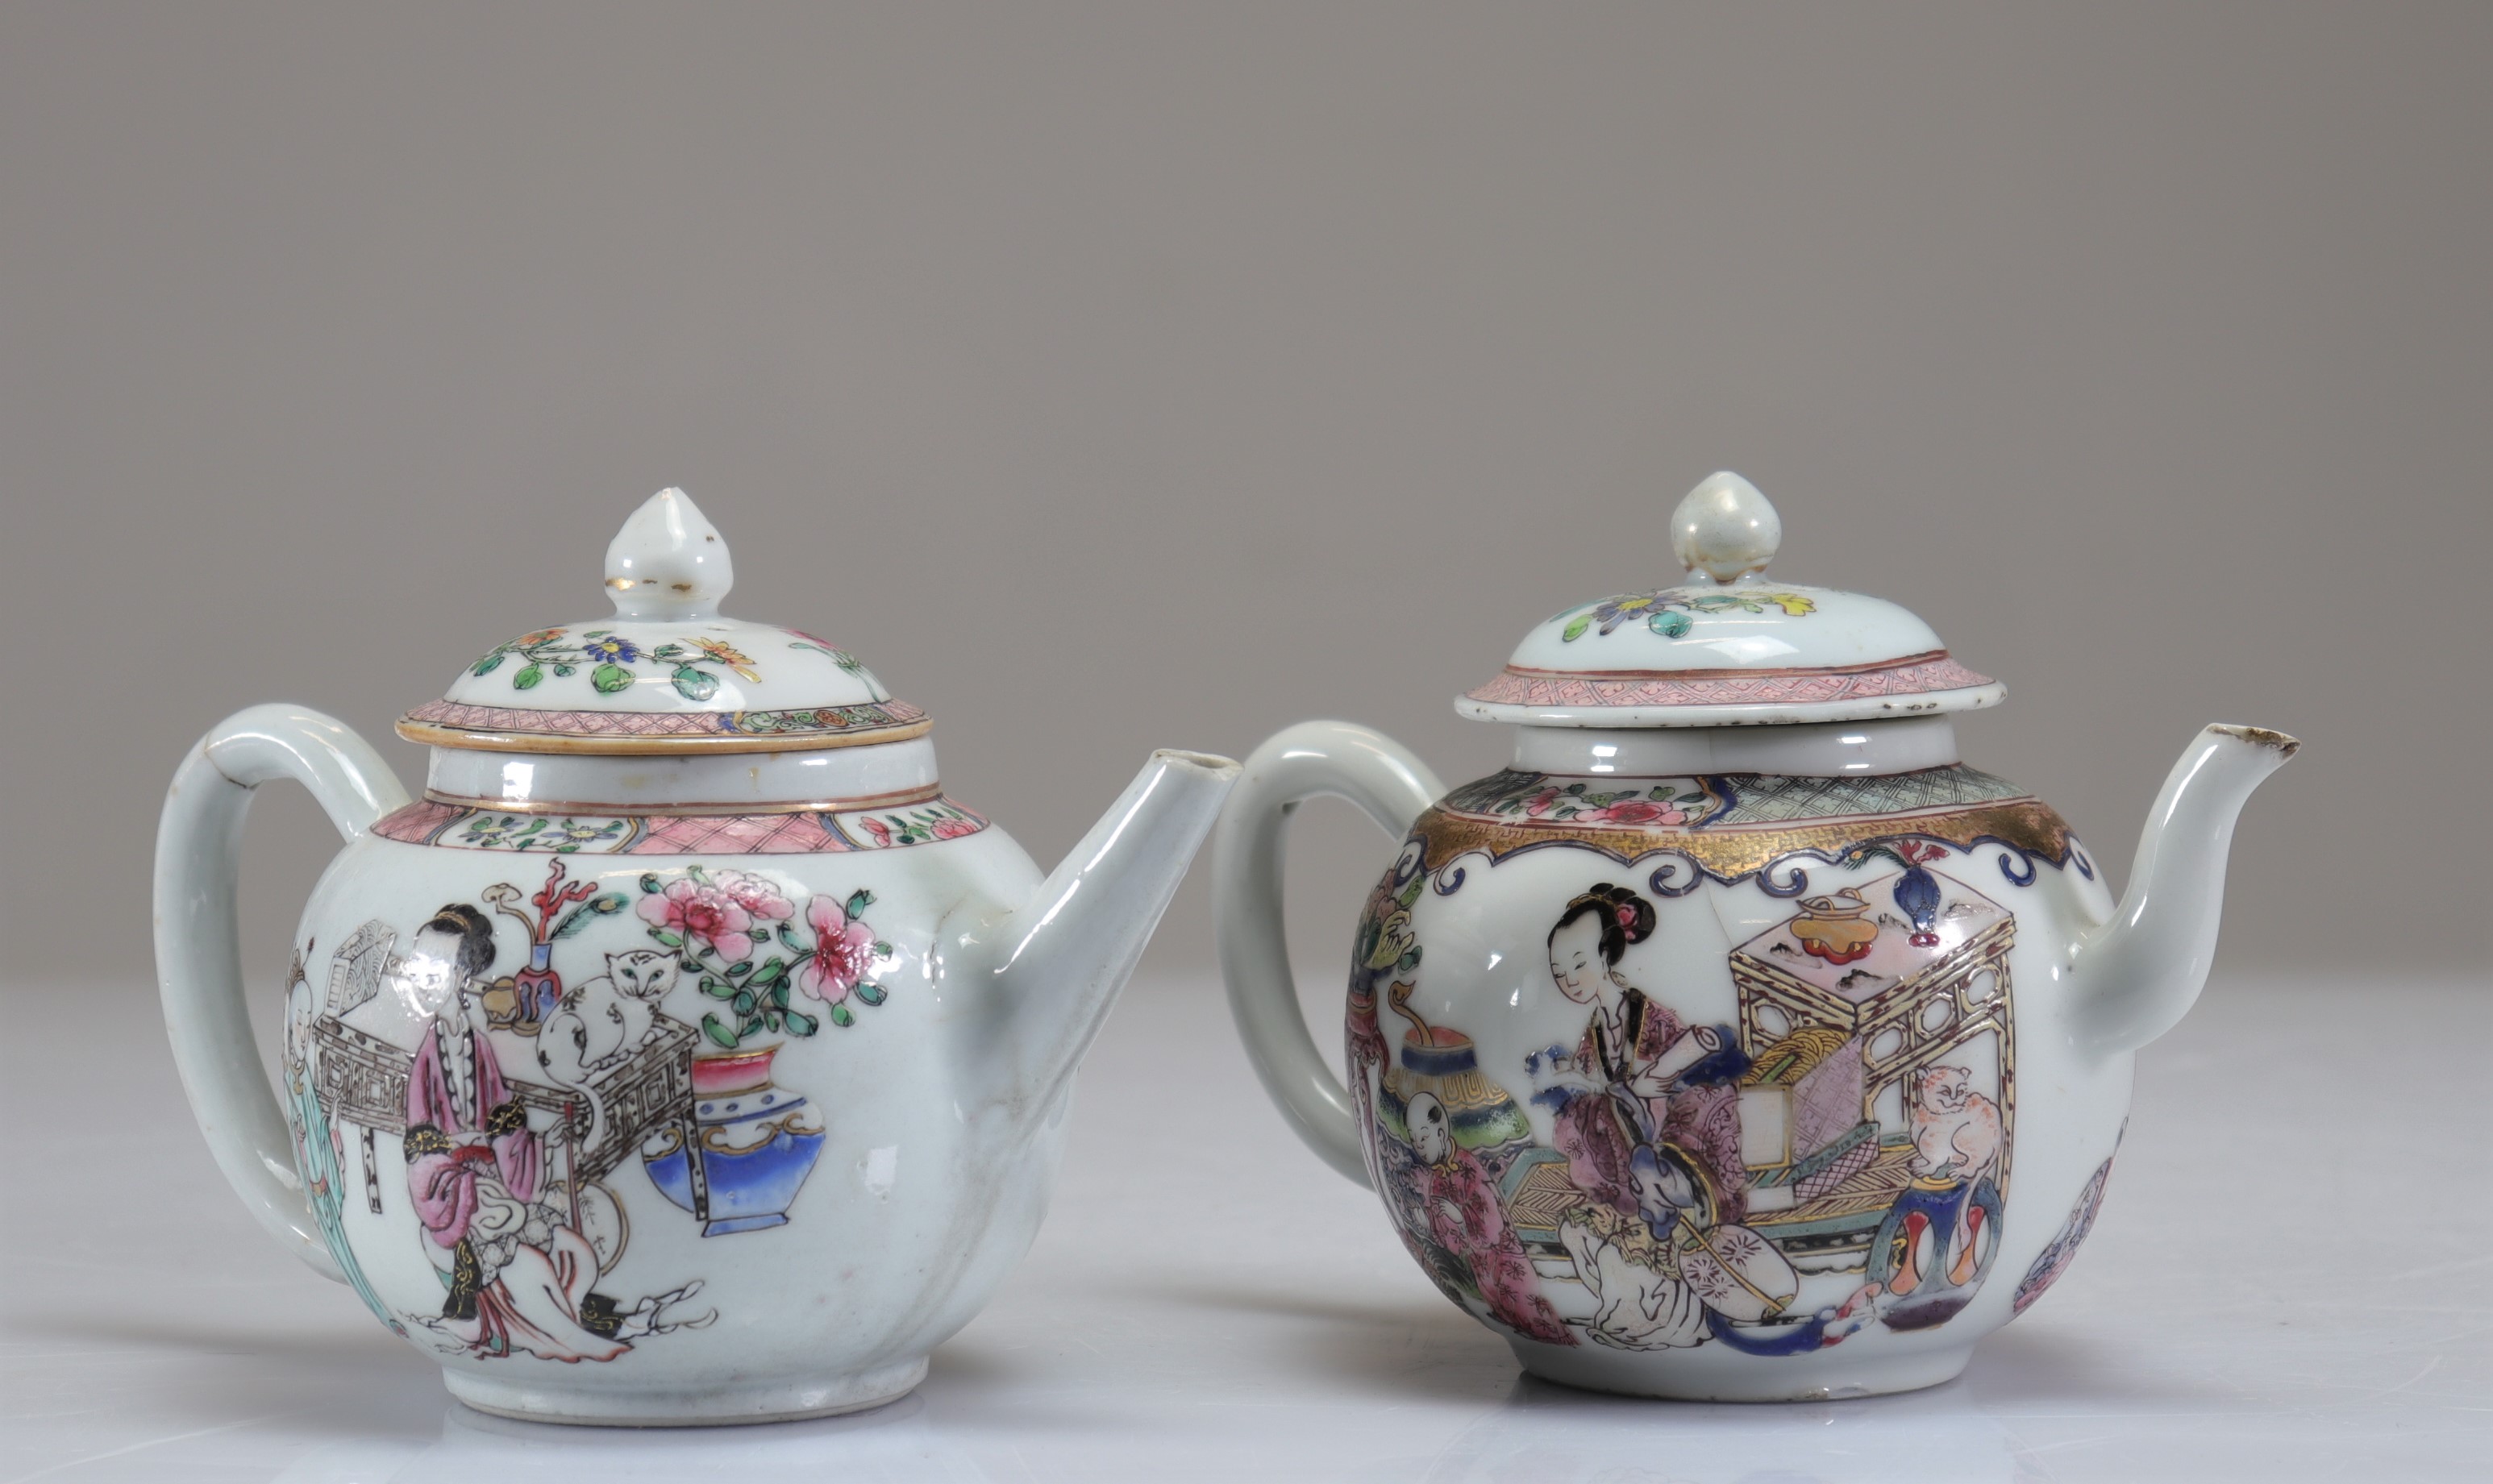 Teapots (2) in 18th century famille rose porcelain - Image 4 of 5